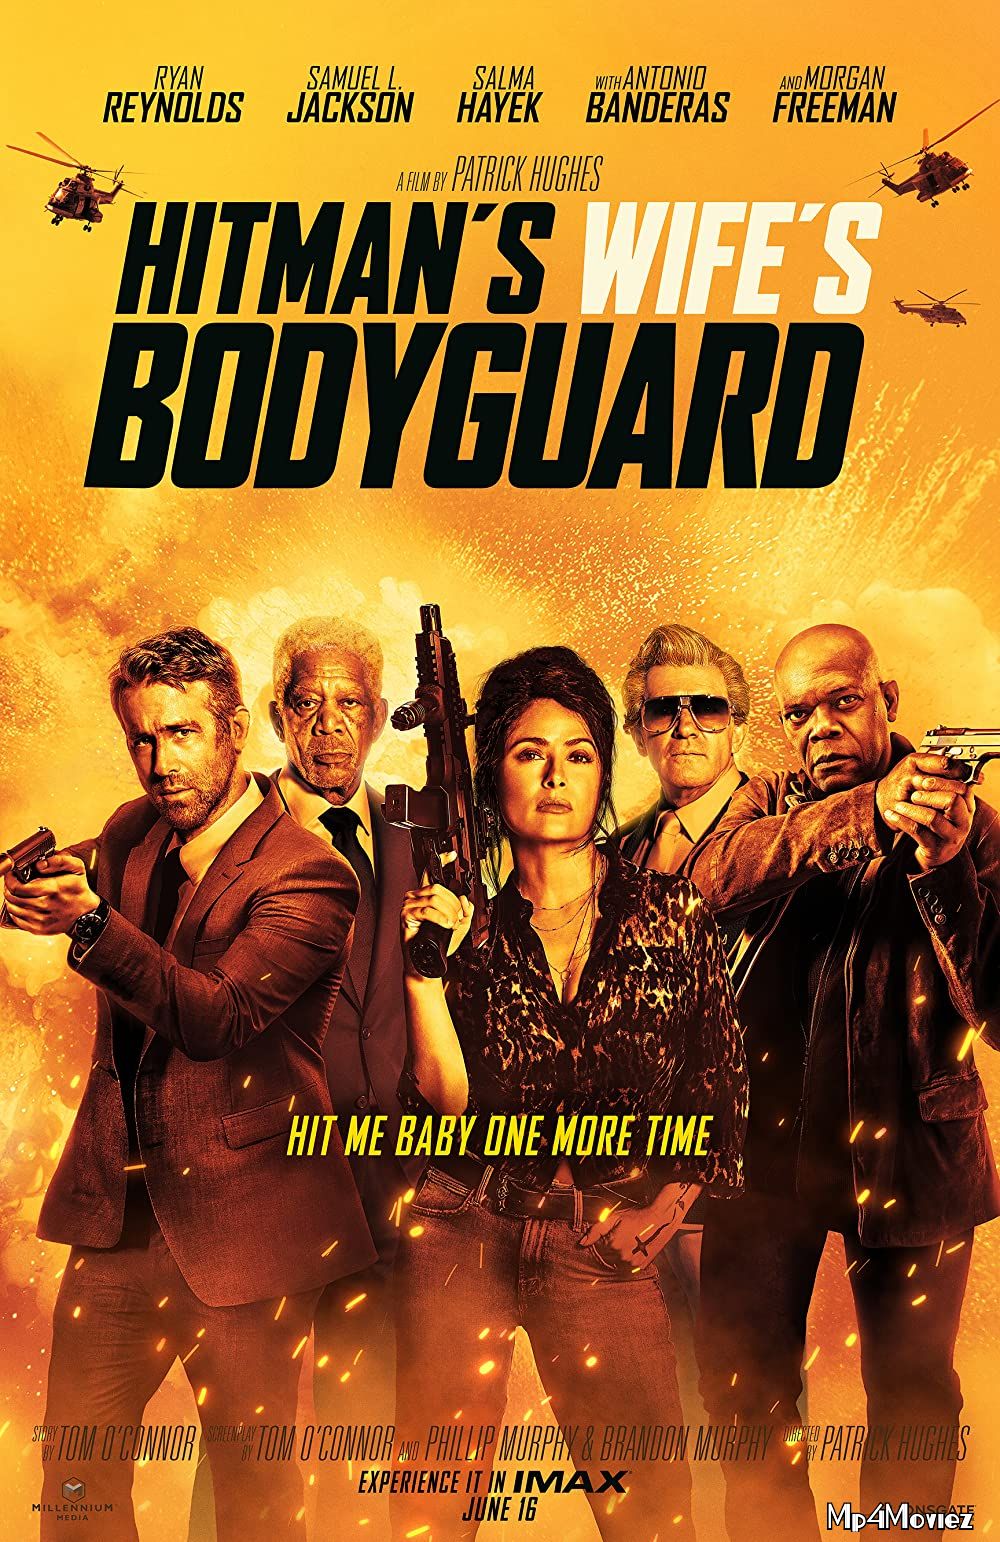 The Hitmans Wifes Bodyguard (2021) English HDCAM download full movie